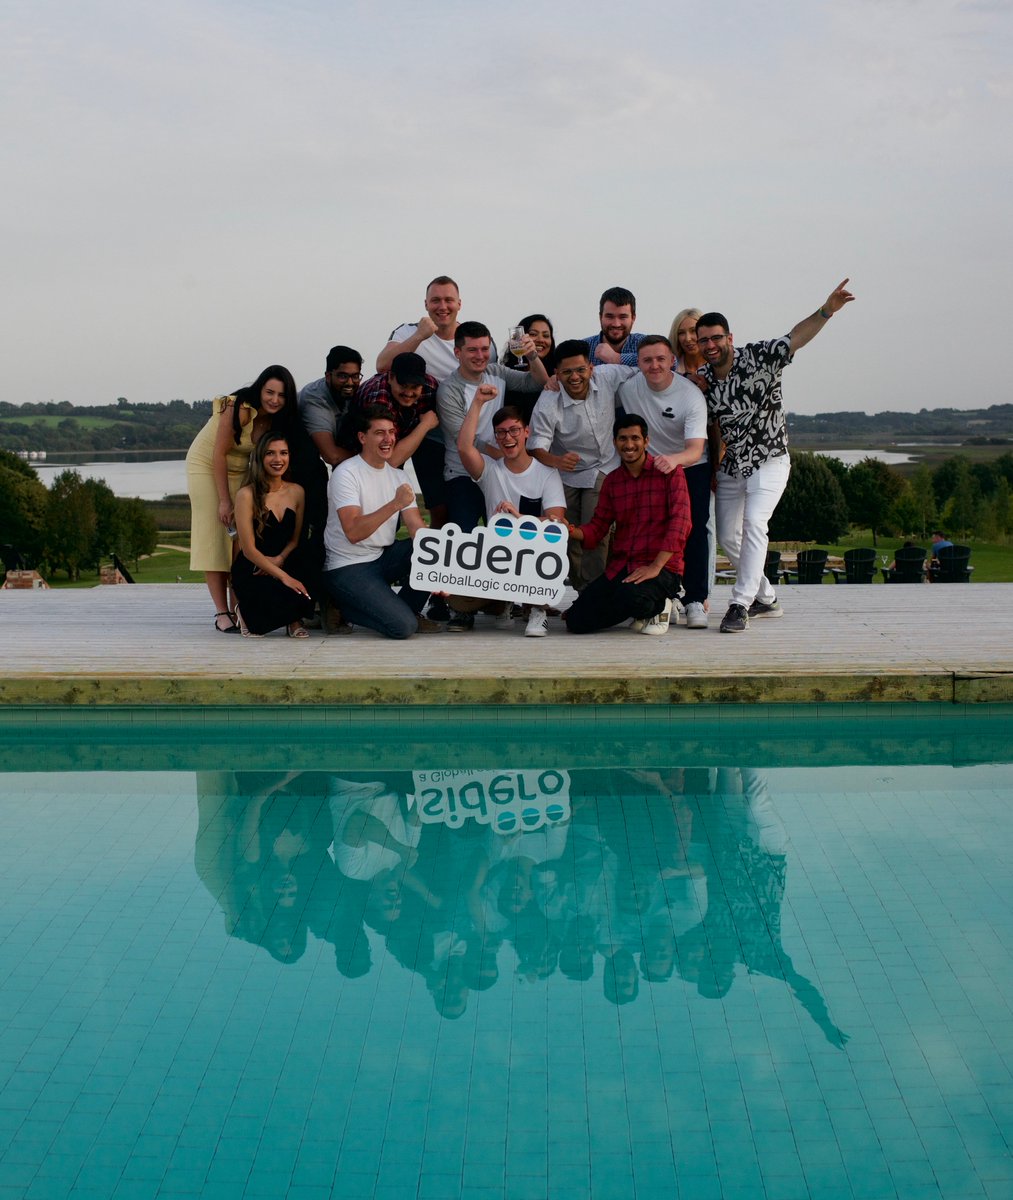 Yesterday, we were absolutely blessed with the weather & our staff enjoyed their @sidero_info Summer BBQ in #GlassonLakehouse🍔☀️ #CostaDelAthlone This was a great opportunity to unwind, connect and celebrate our incredible team! #LifeAtGL